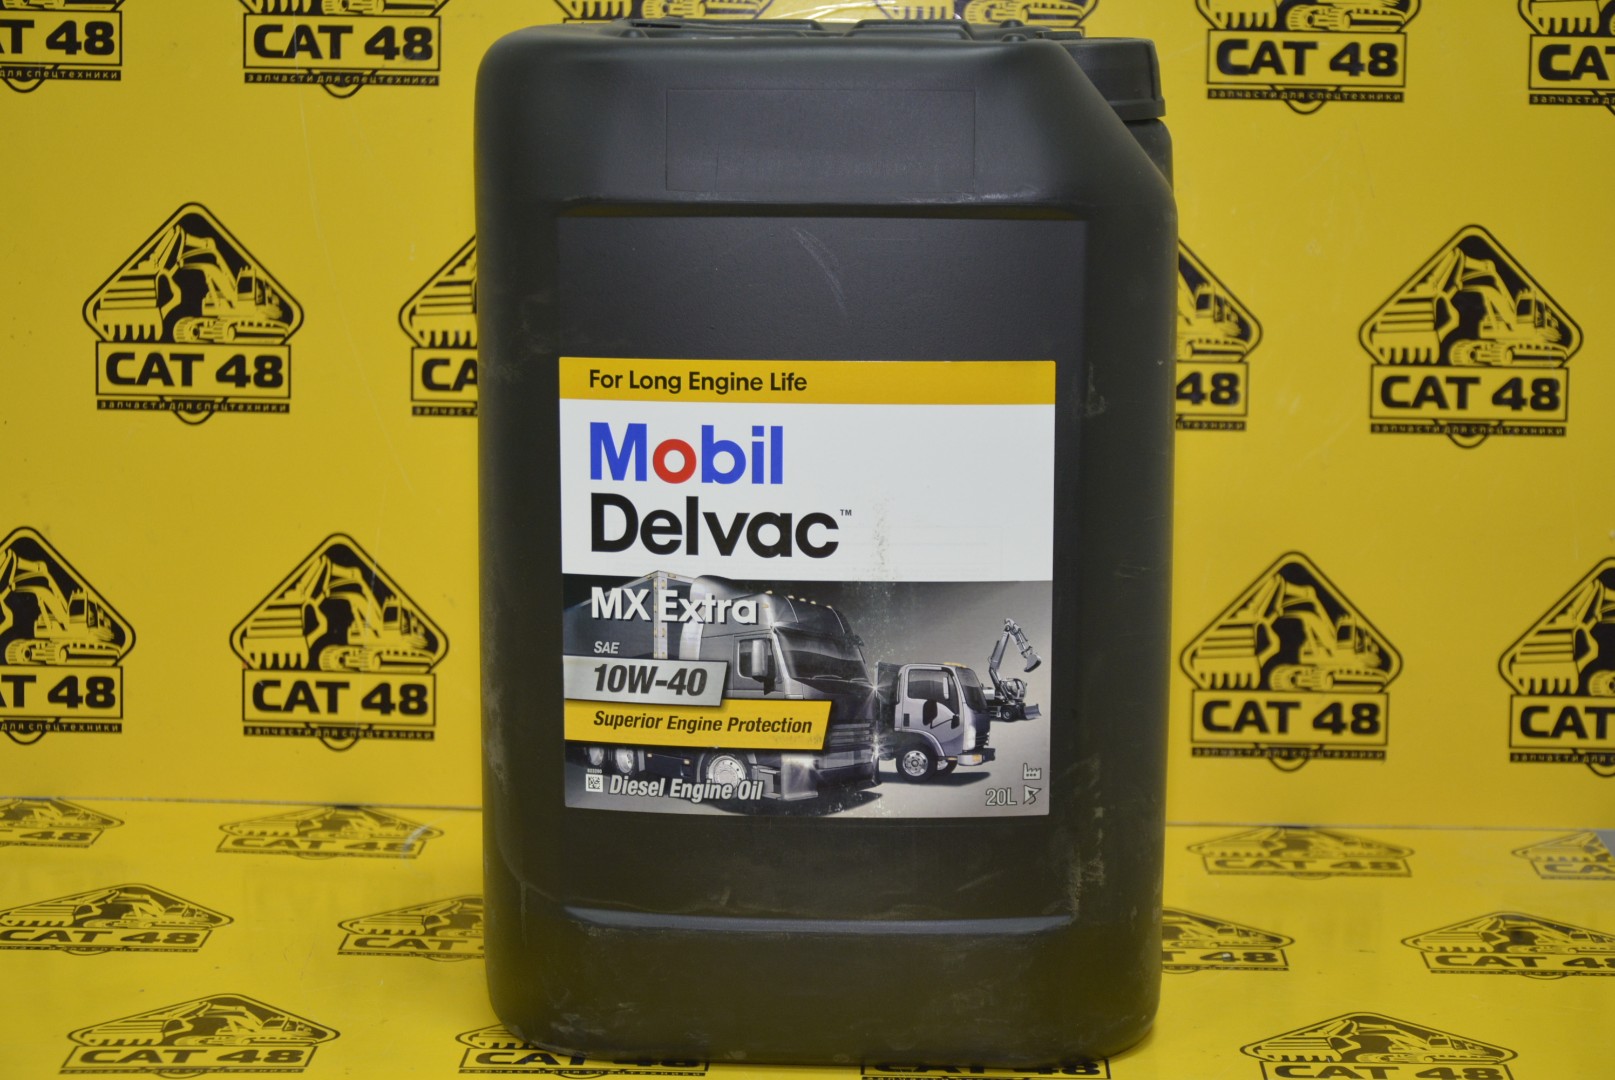 МАСЛО МОТОРНОЕ MOBIL DELVAC MX Extra 10W-40 (20Л) / Масла и смазки .